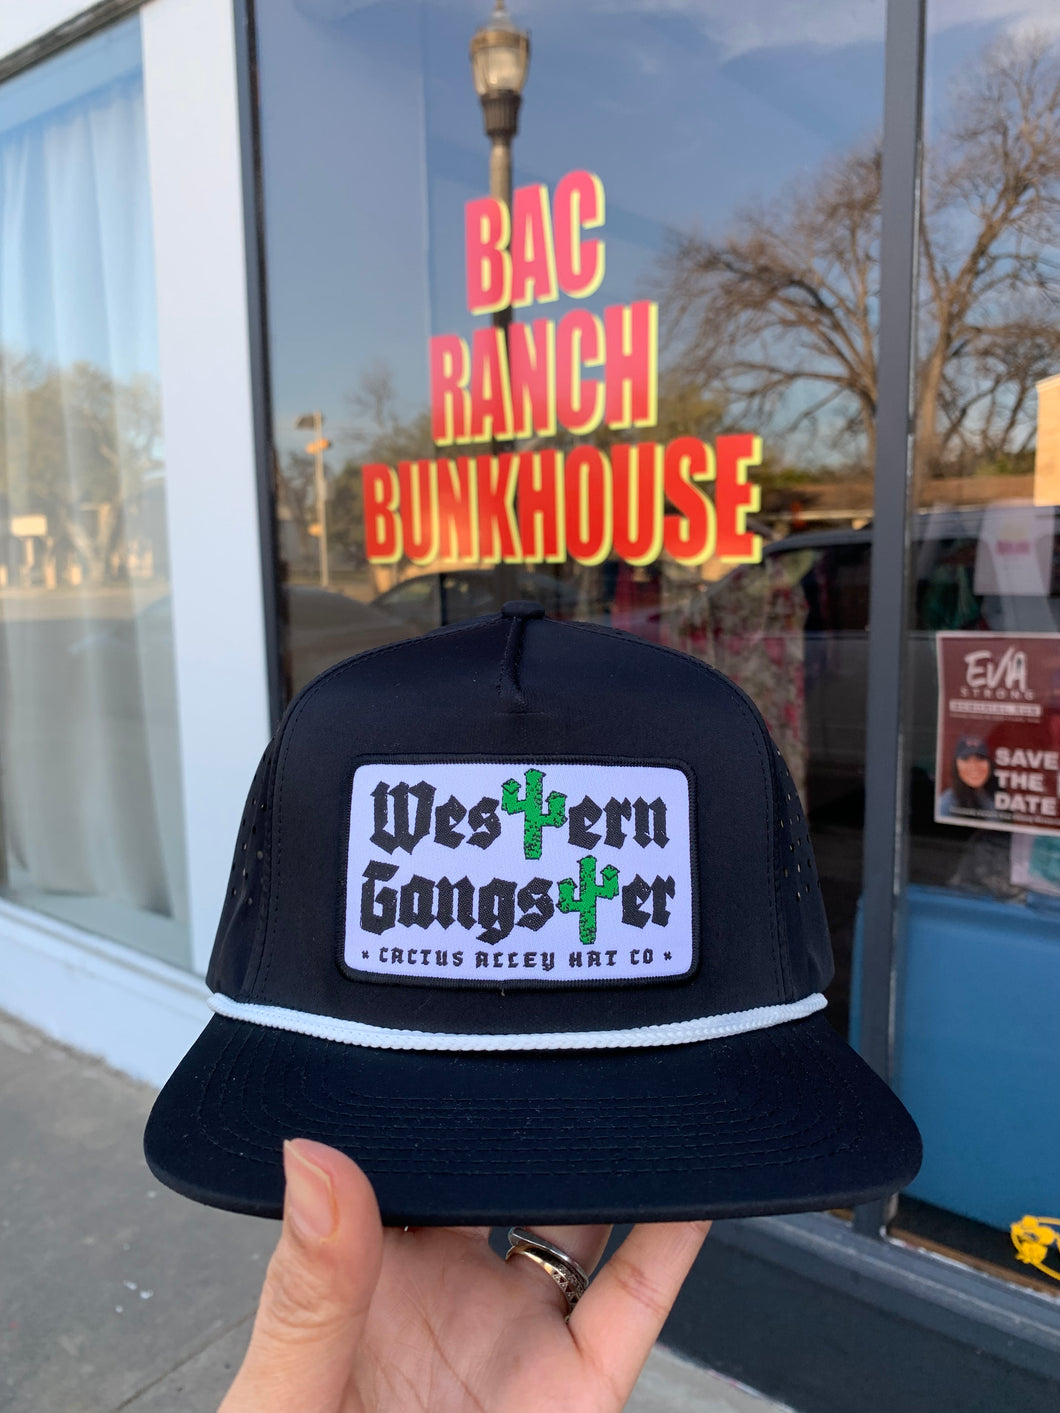 CAHC “WESTERN GANGSTER” Cap